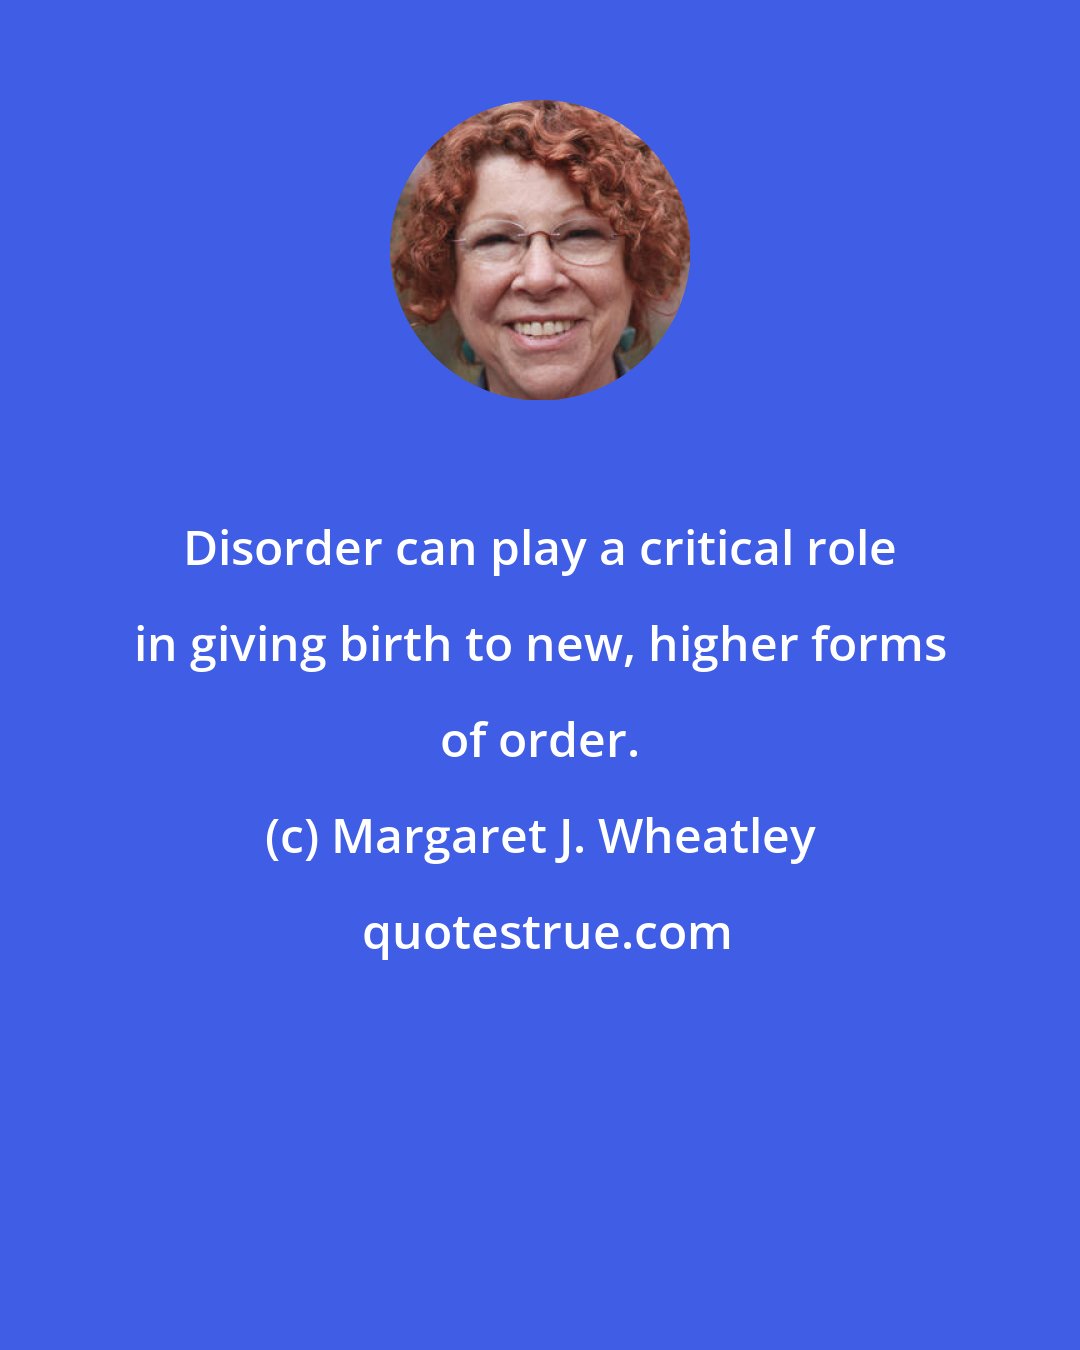 Margaret J. Wheatley: Disorder can play a critical role in giving birth to new, higher forms of order.